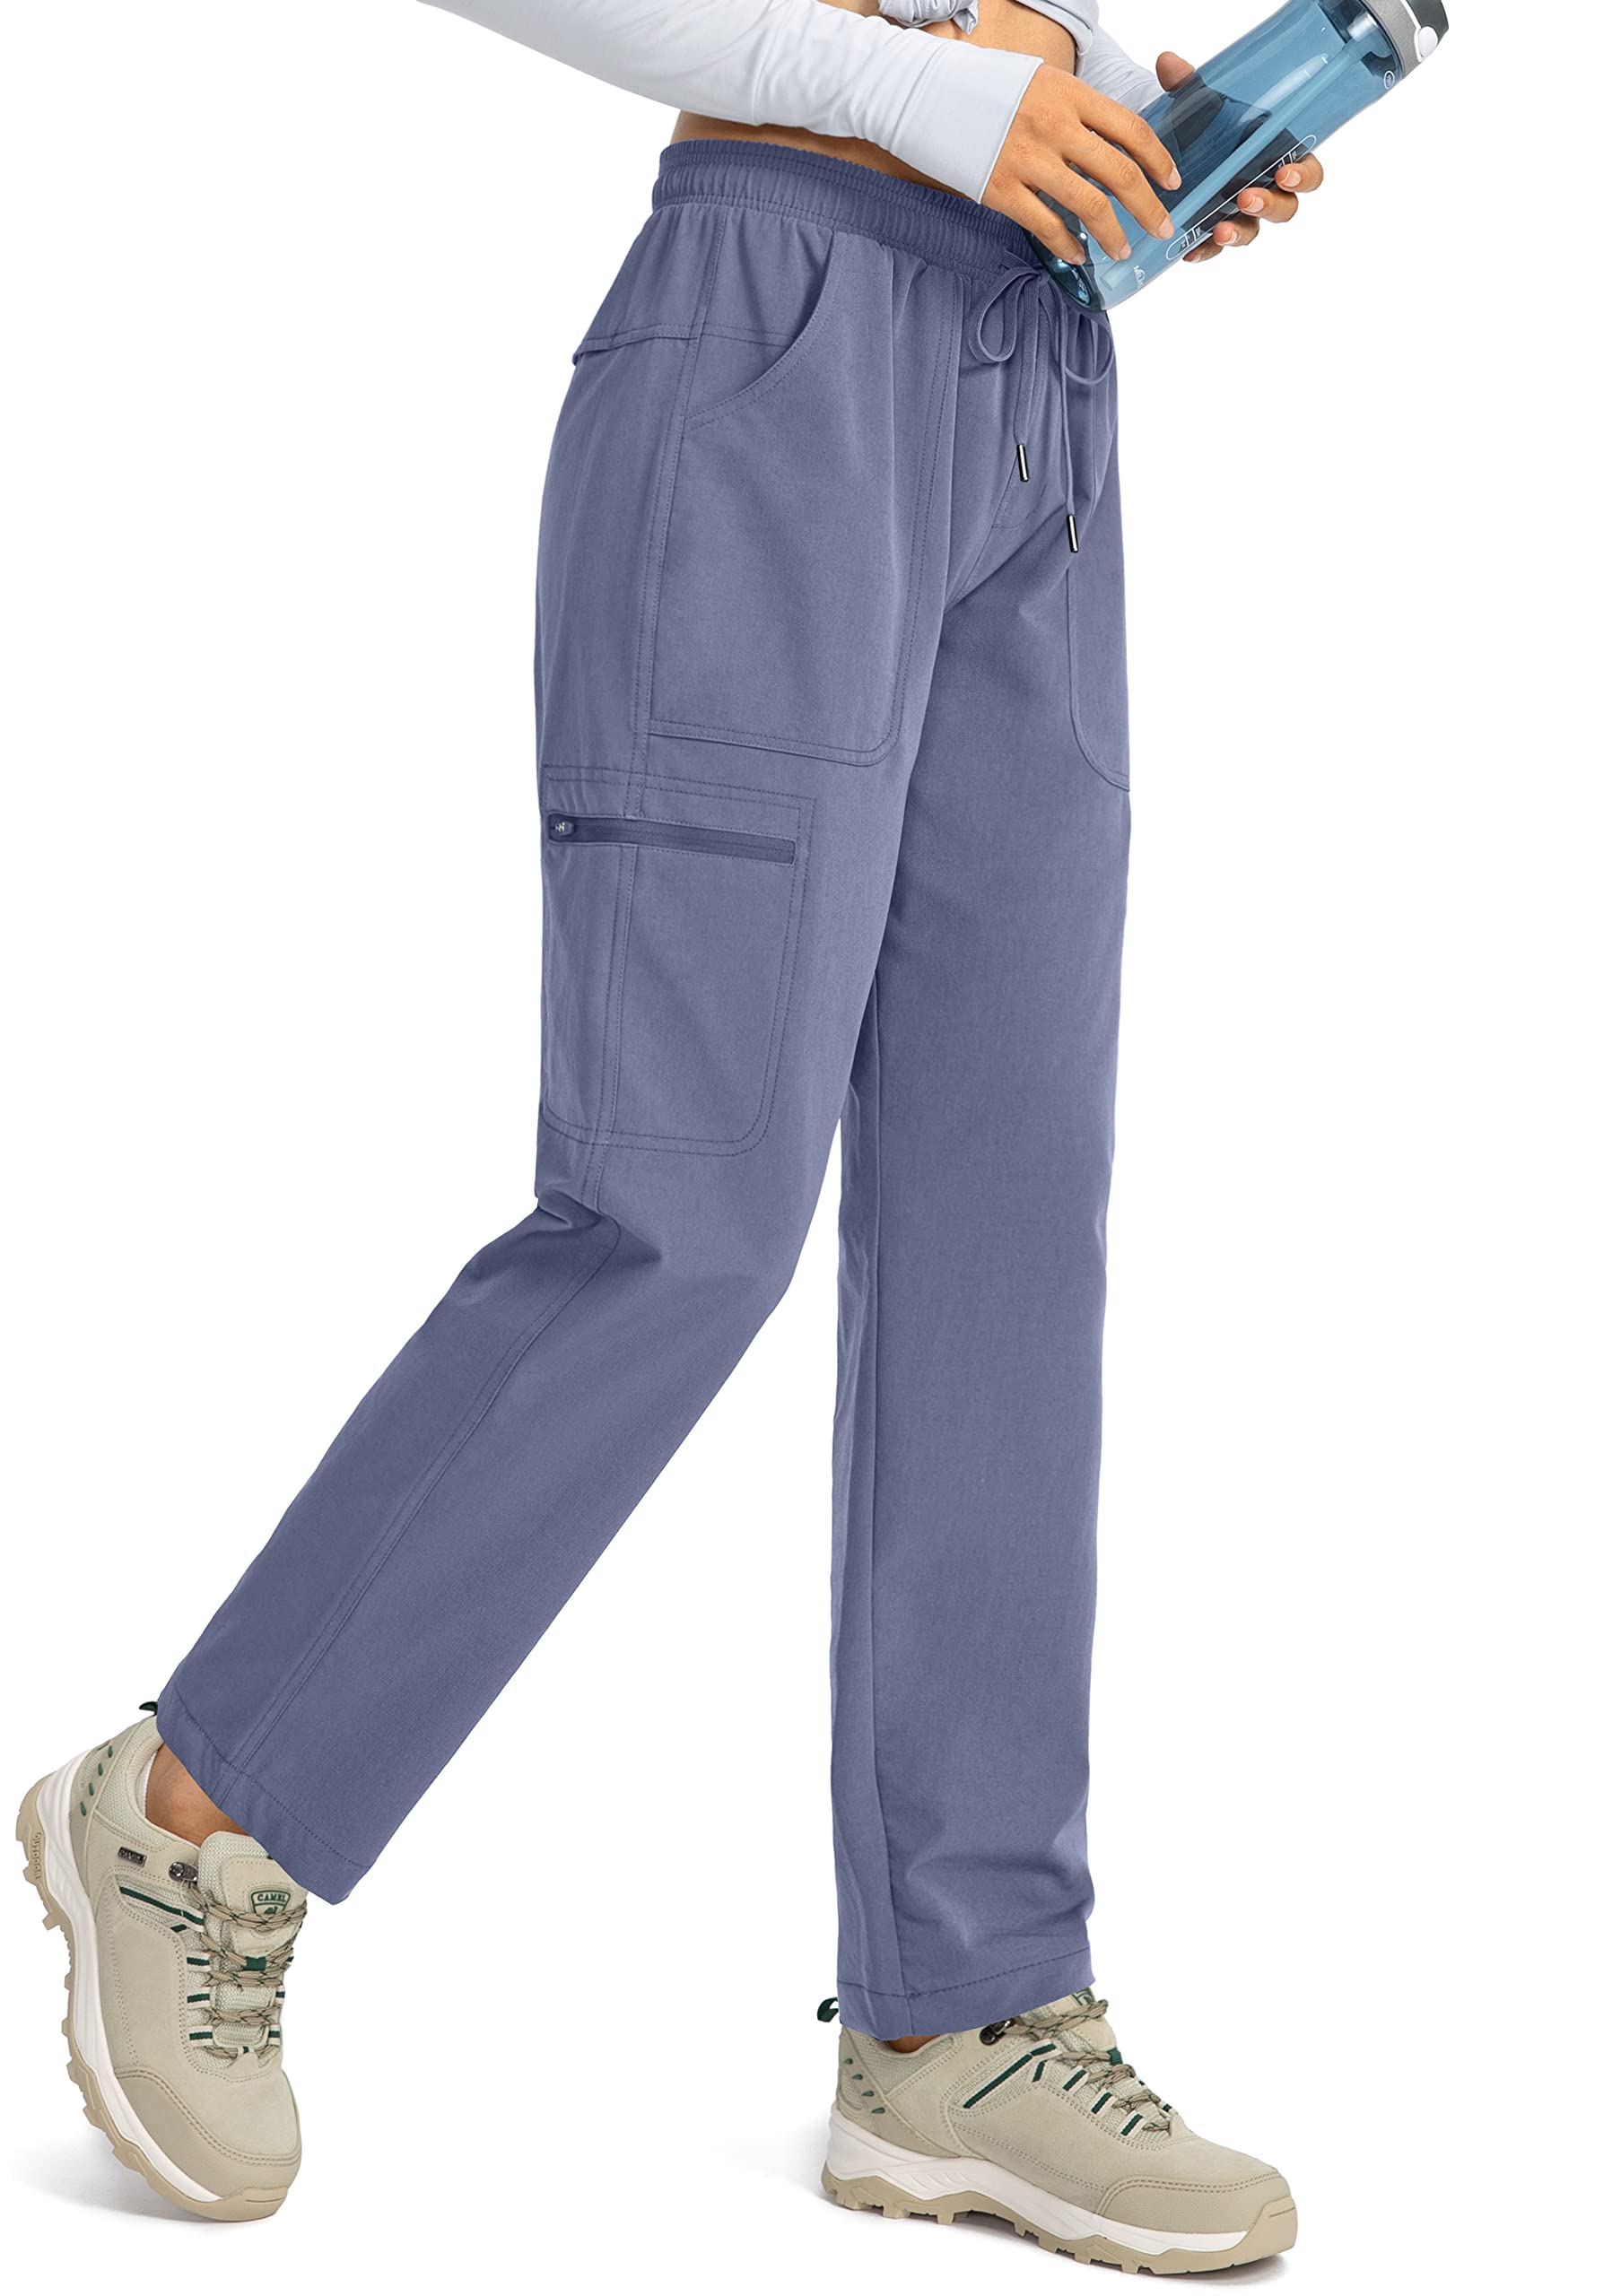 Viodia Women's Hiking Cargo Pants with Pockets Quick Dry UPF50+  Water-Resistant Pants for Women Golf Travel Climbing Pants X-Small Blue  Ashes